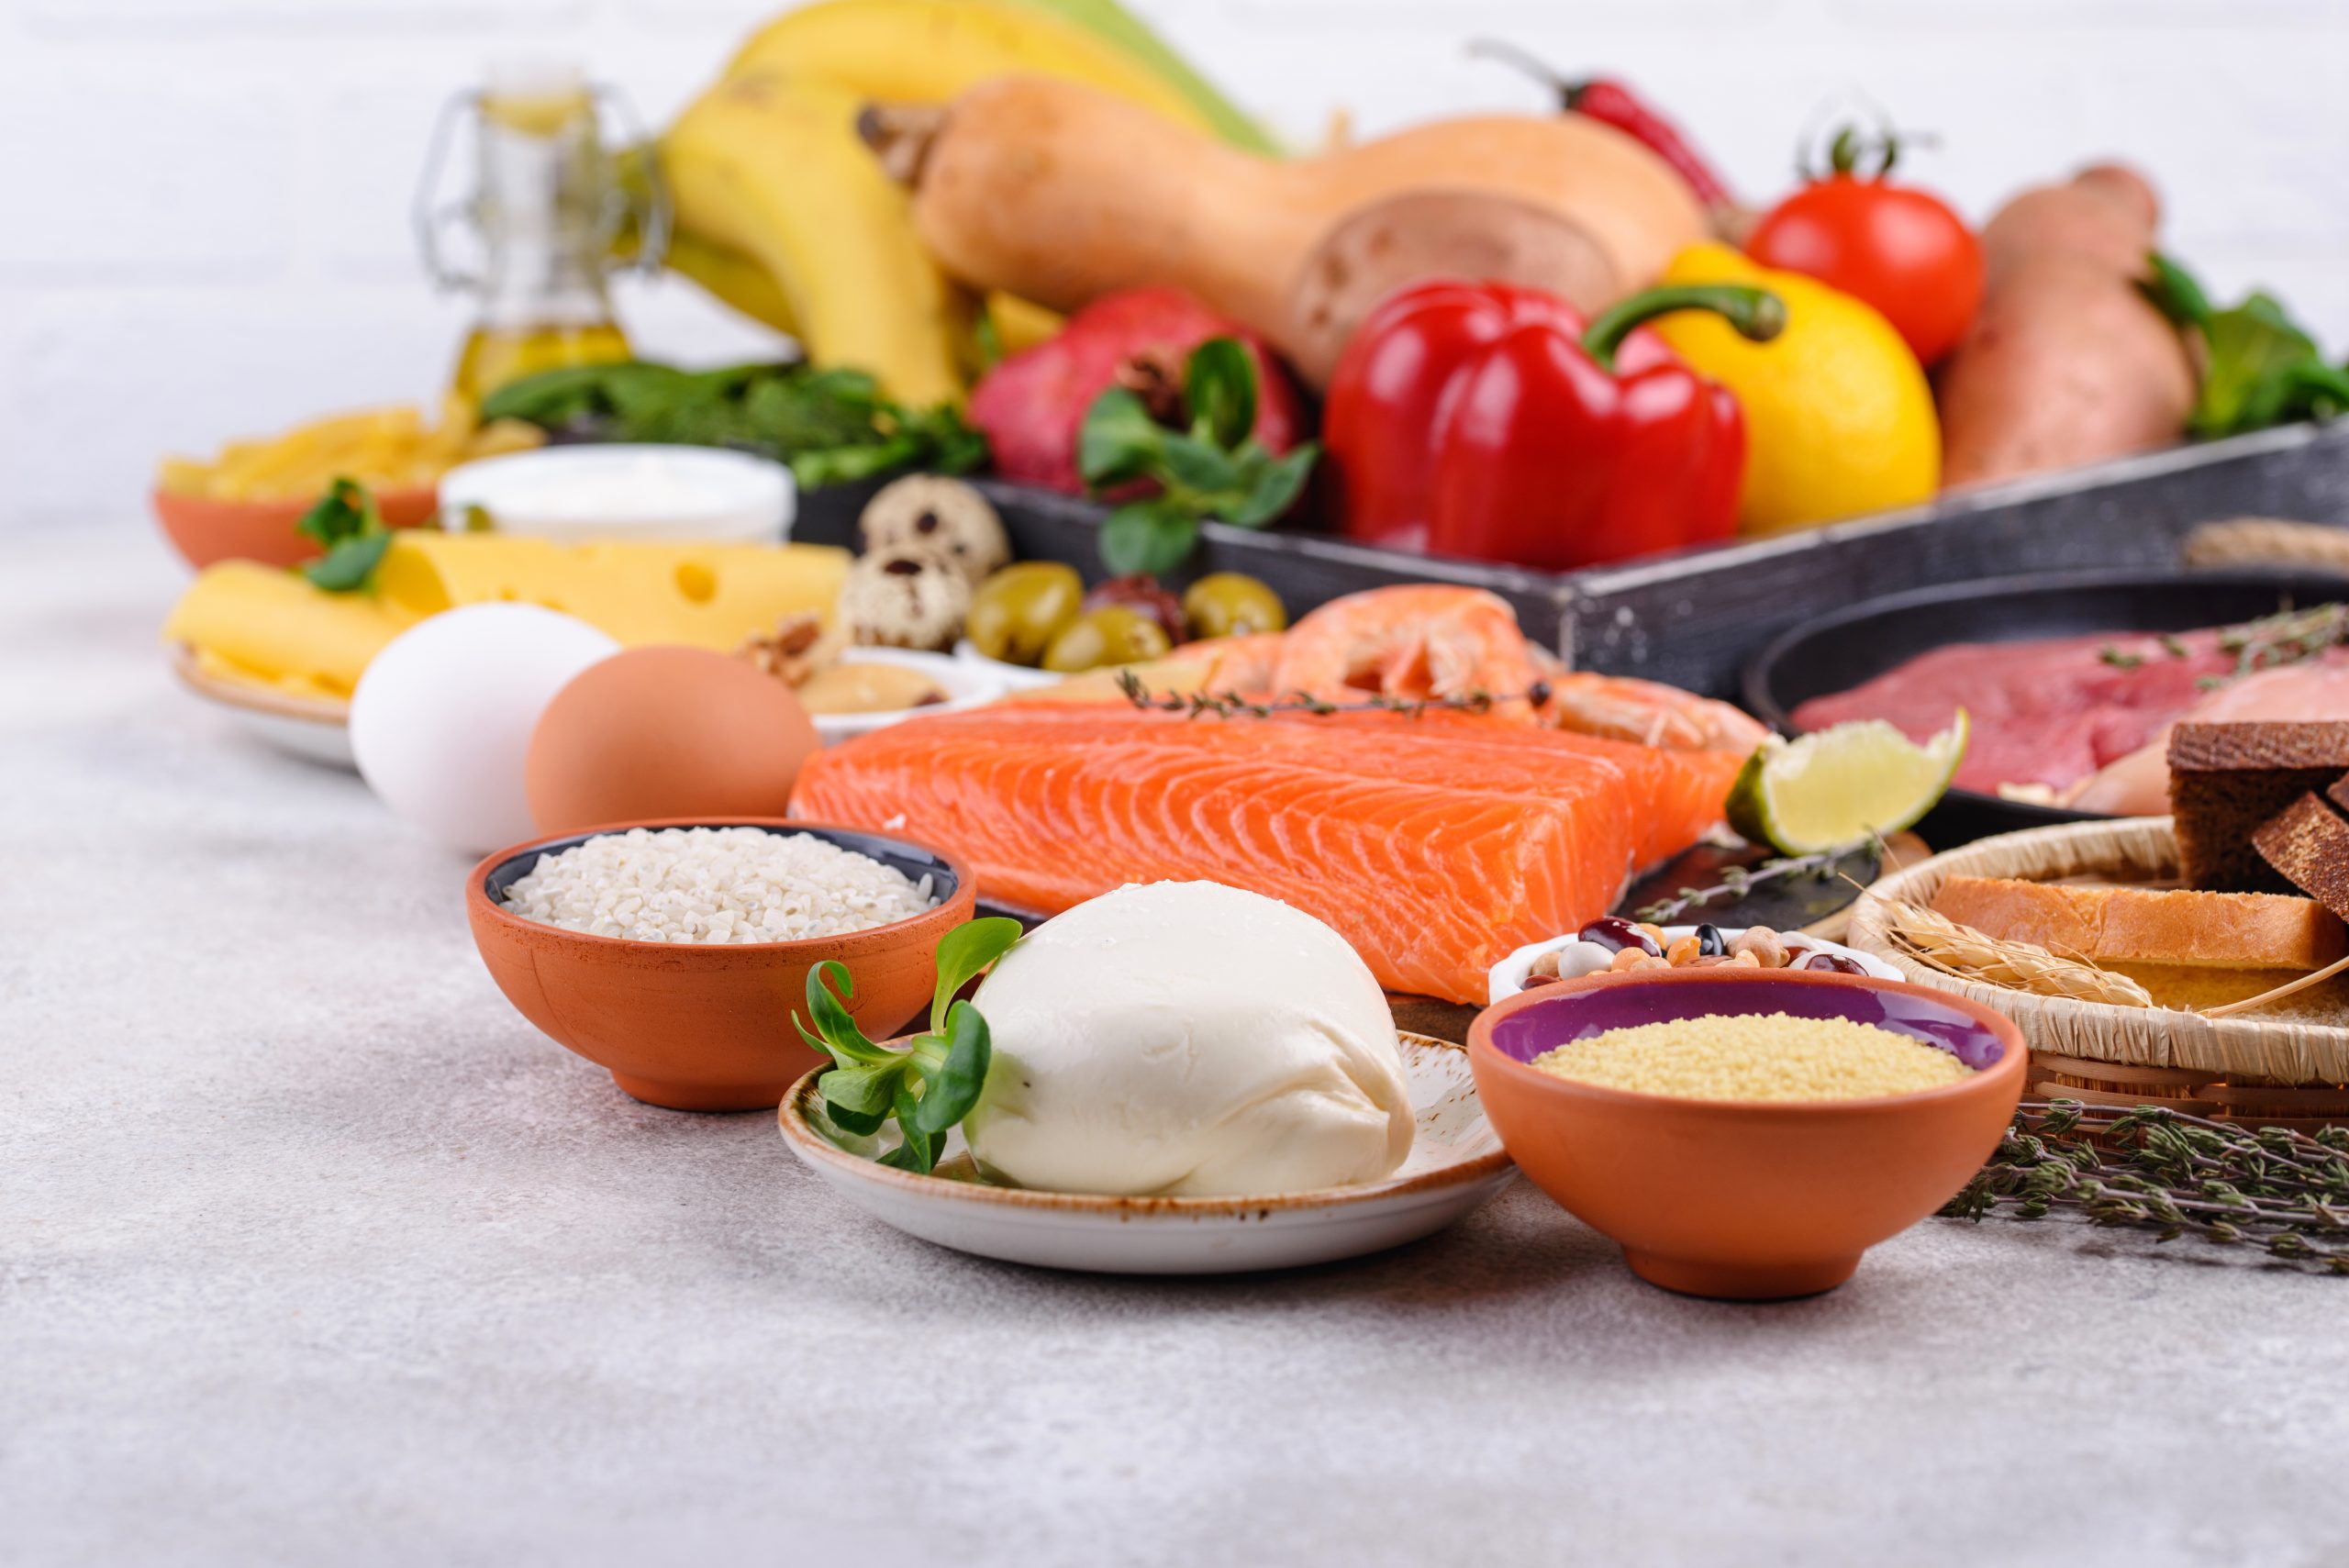 Assorted foods including salmon, mozzarella cheese, fruits, vegetables, and grains, representing a balanced Mediterranean diet, highlighting the nutritional benefits of the Mediterranean diet vs Keto diet.